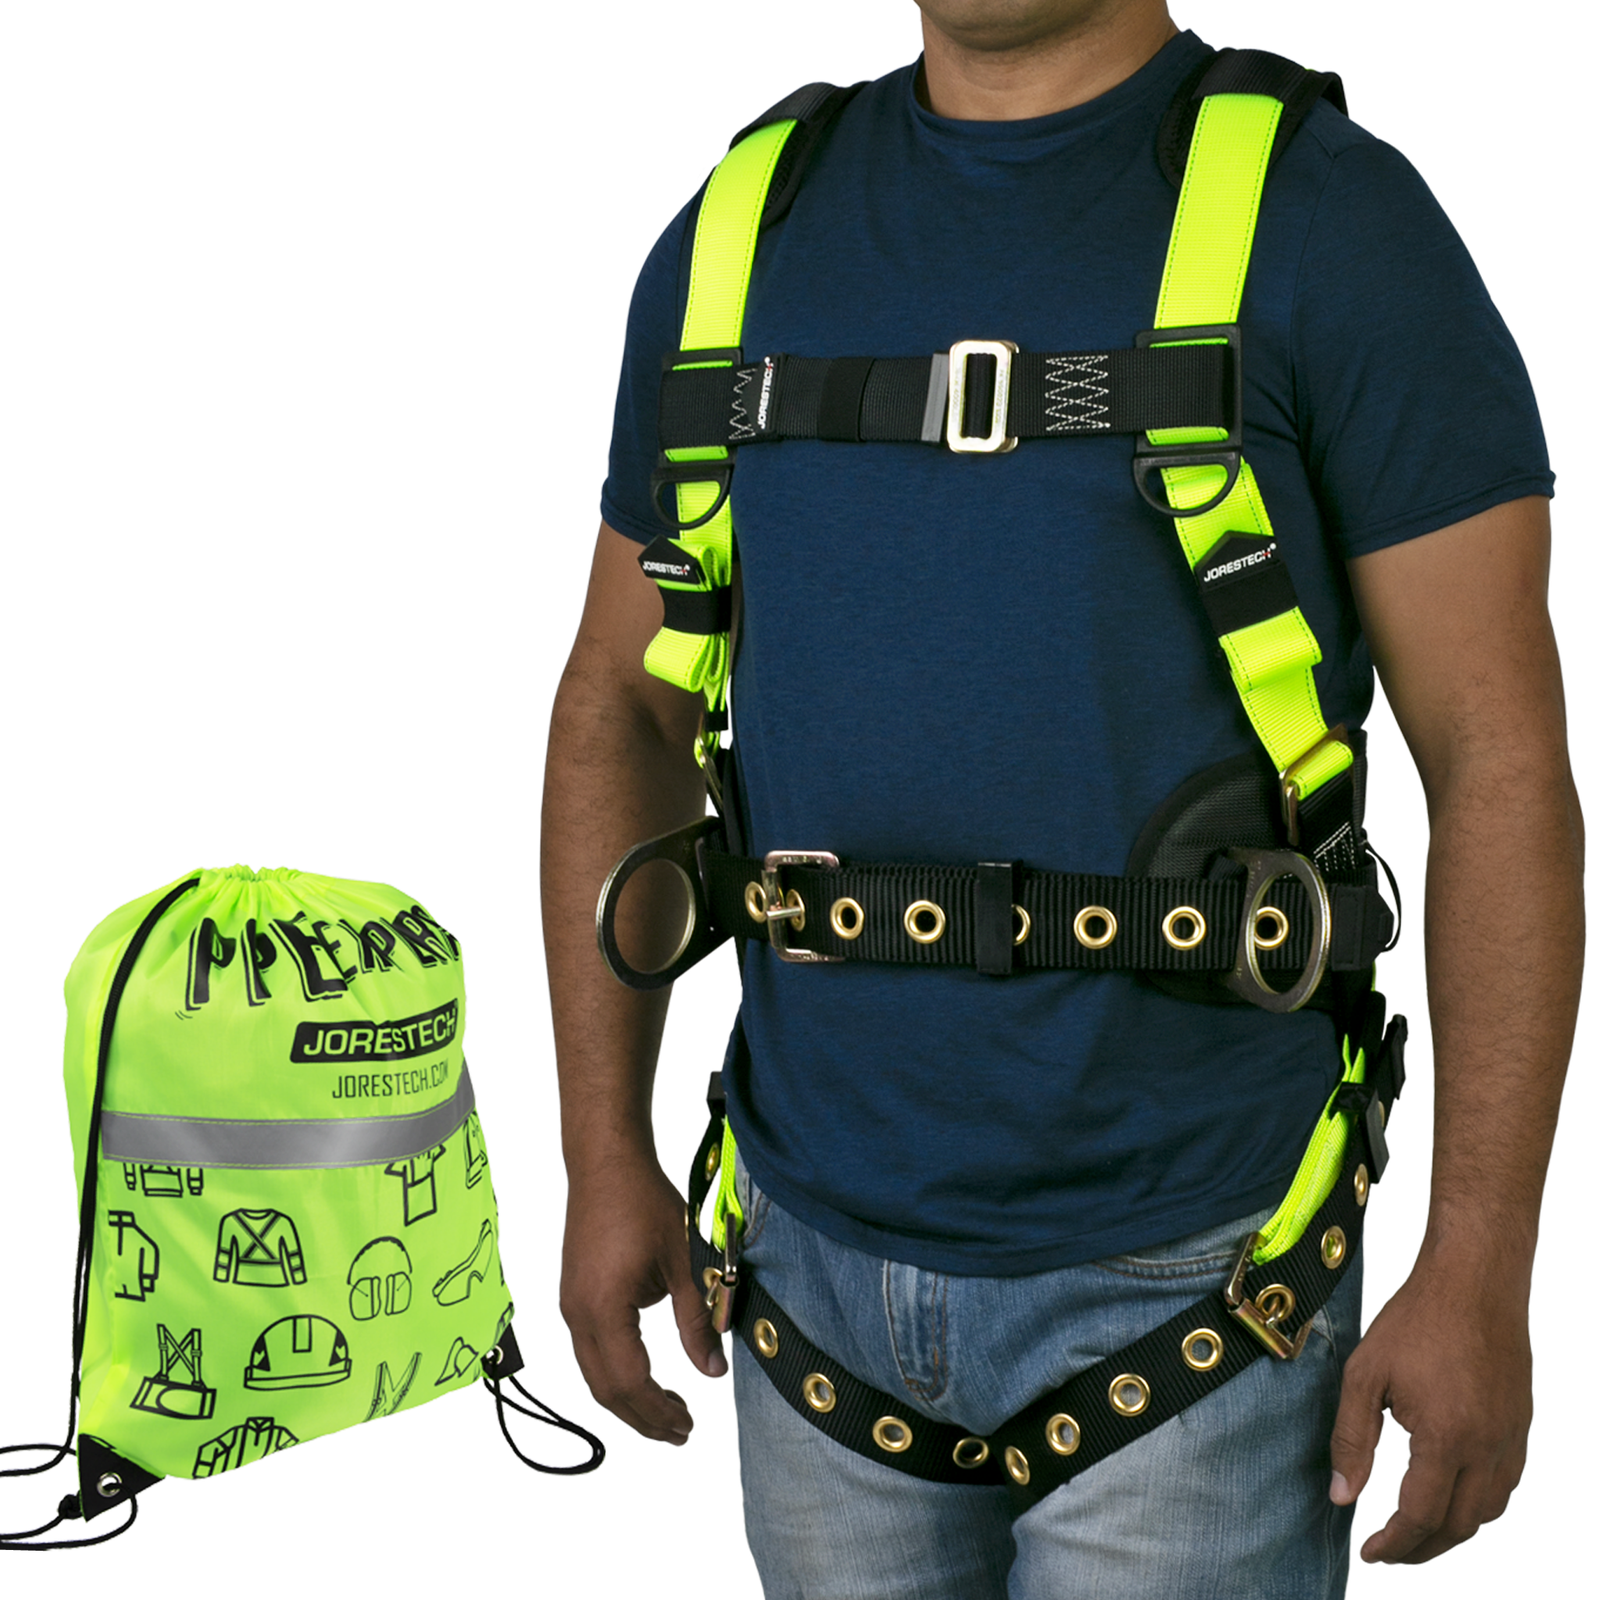 Gear and Tool Storage Replacement Shoulder Strap